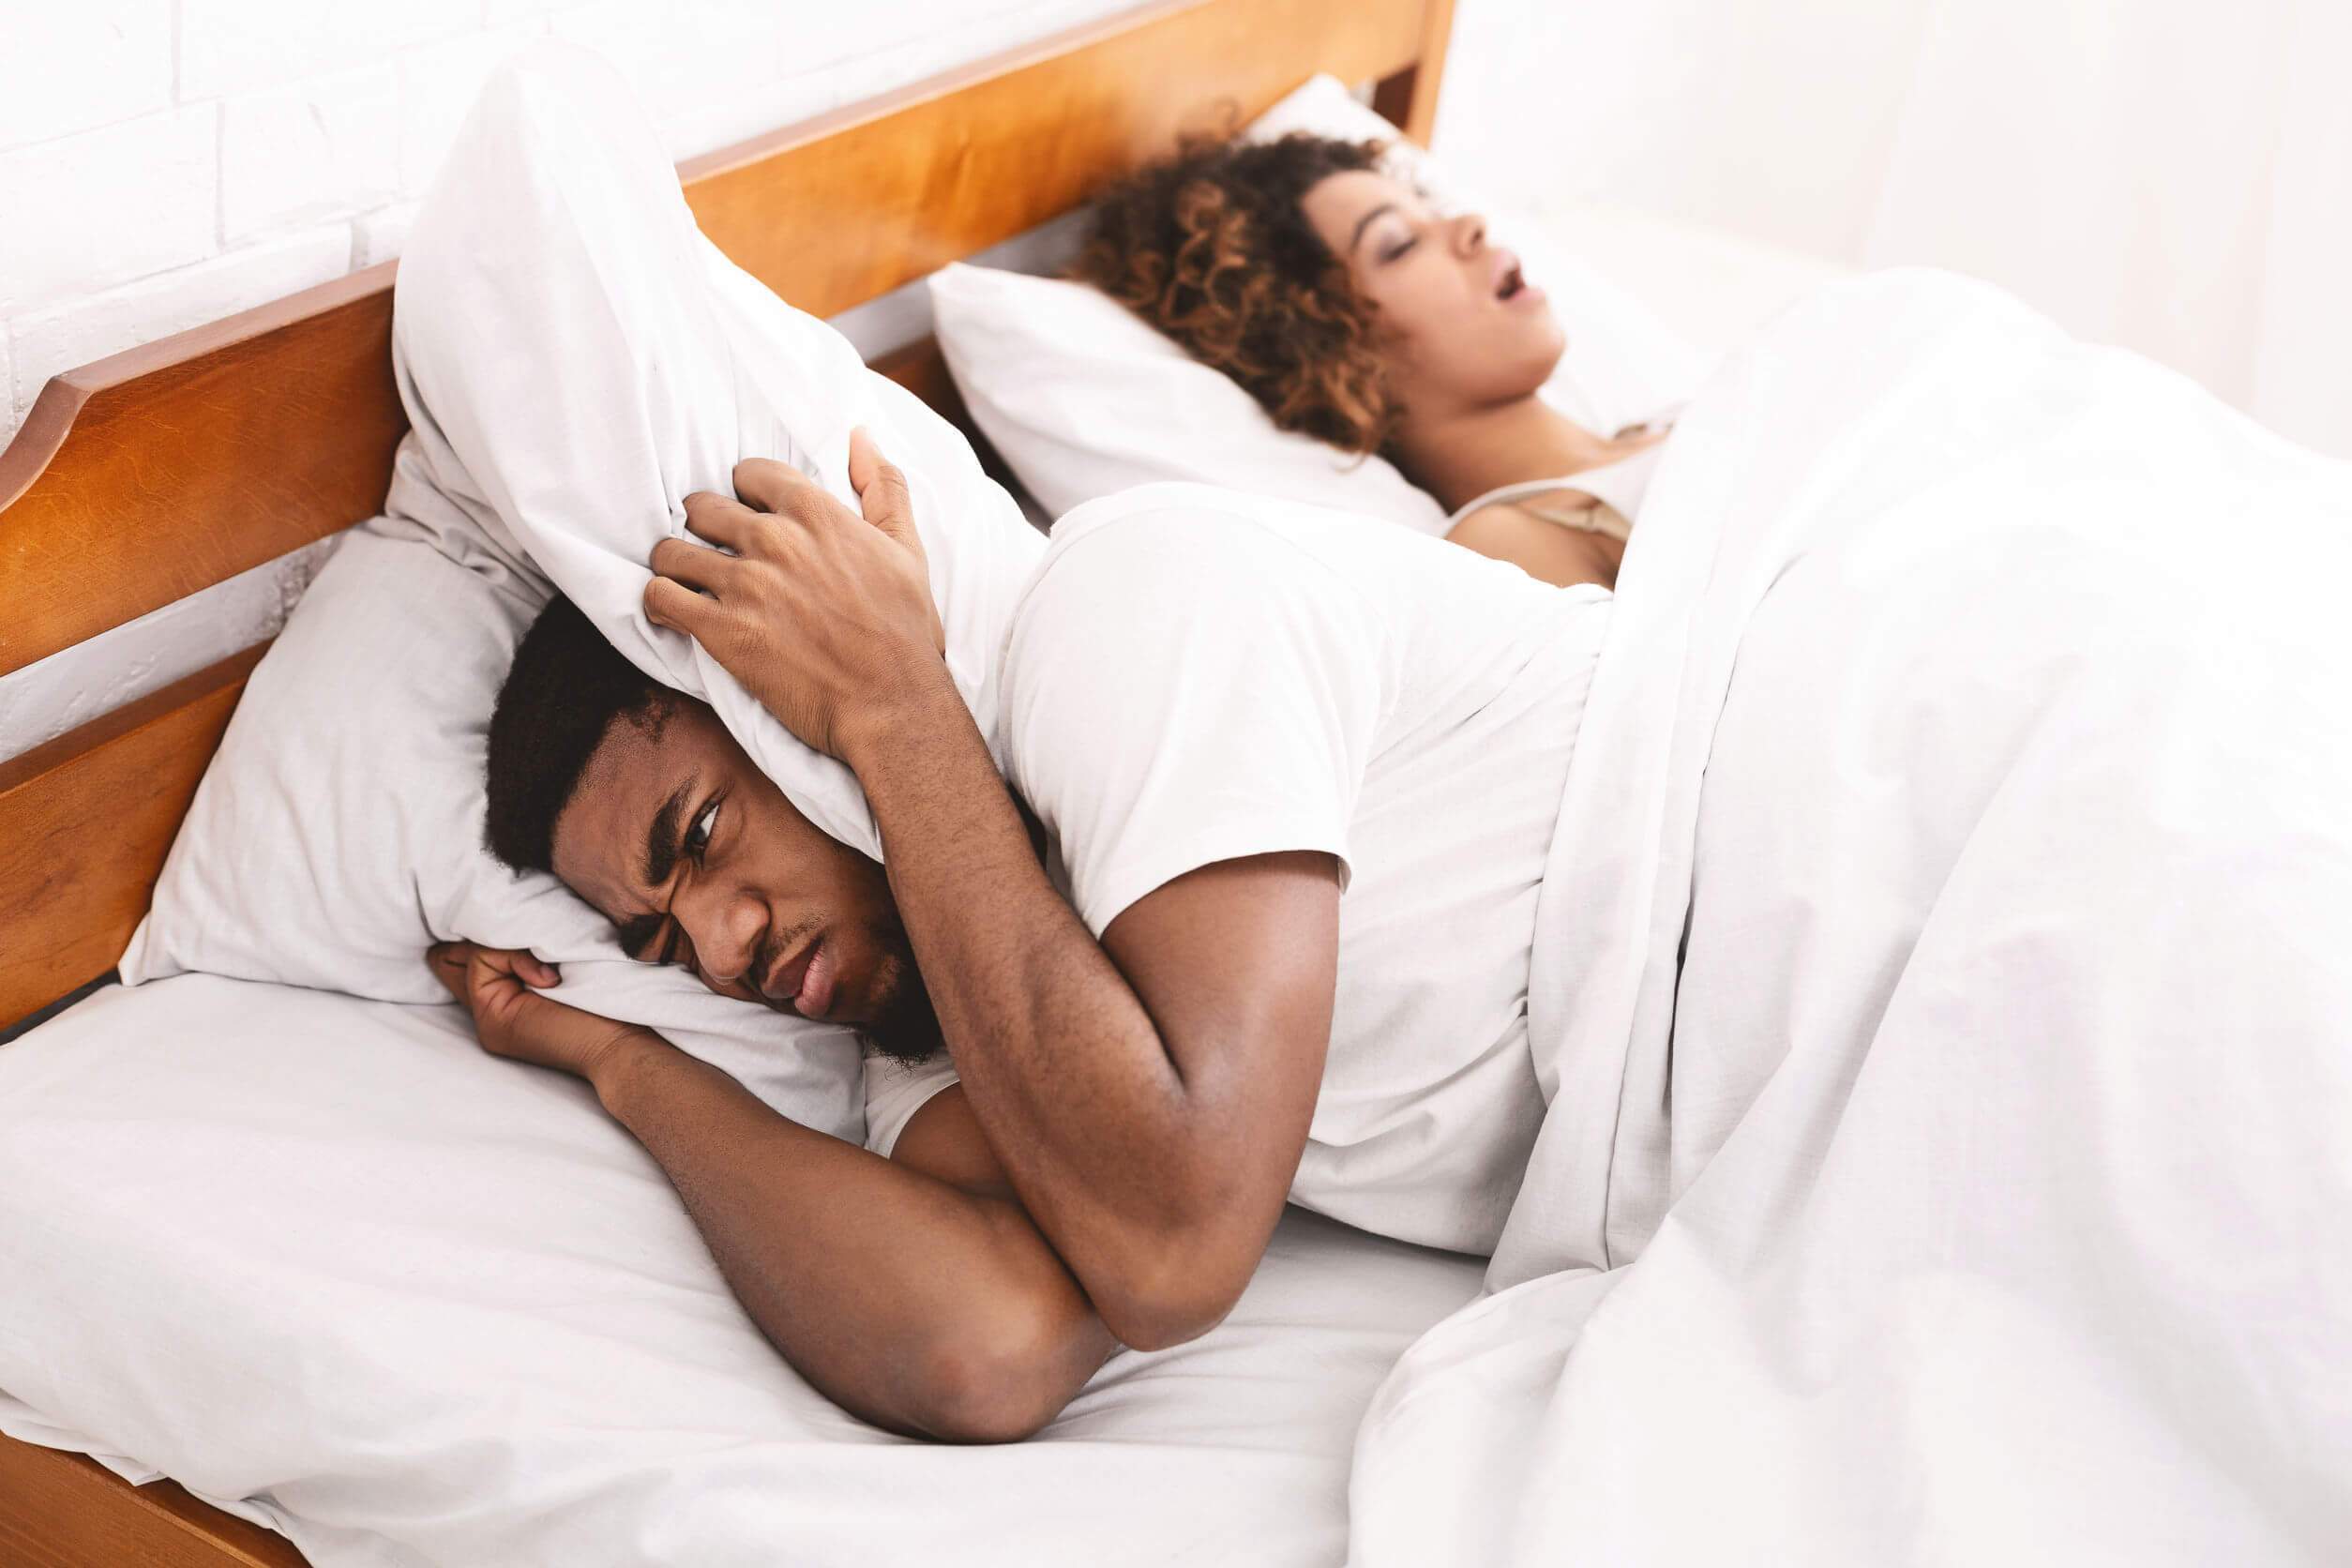 Women Snore. And They Shouldn’t Be Embarrassed.